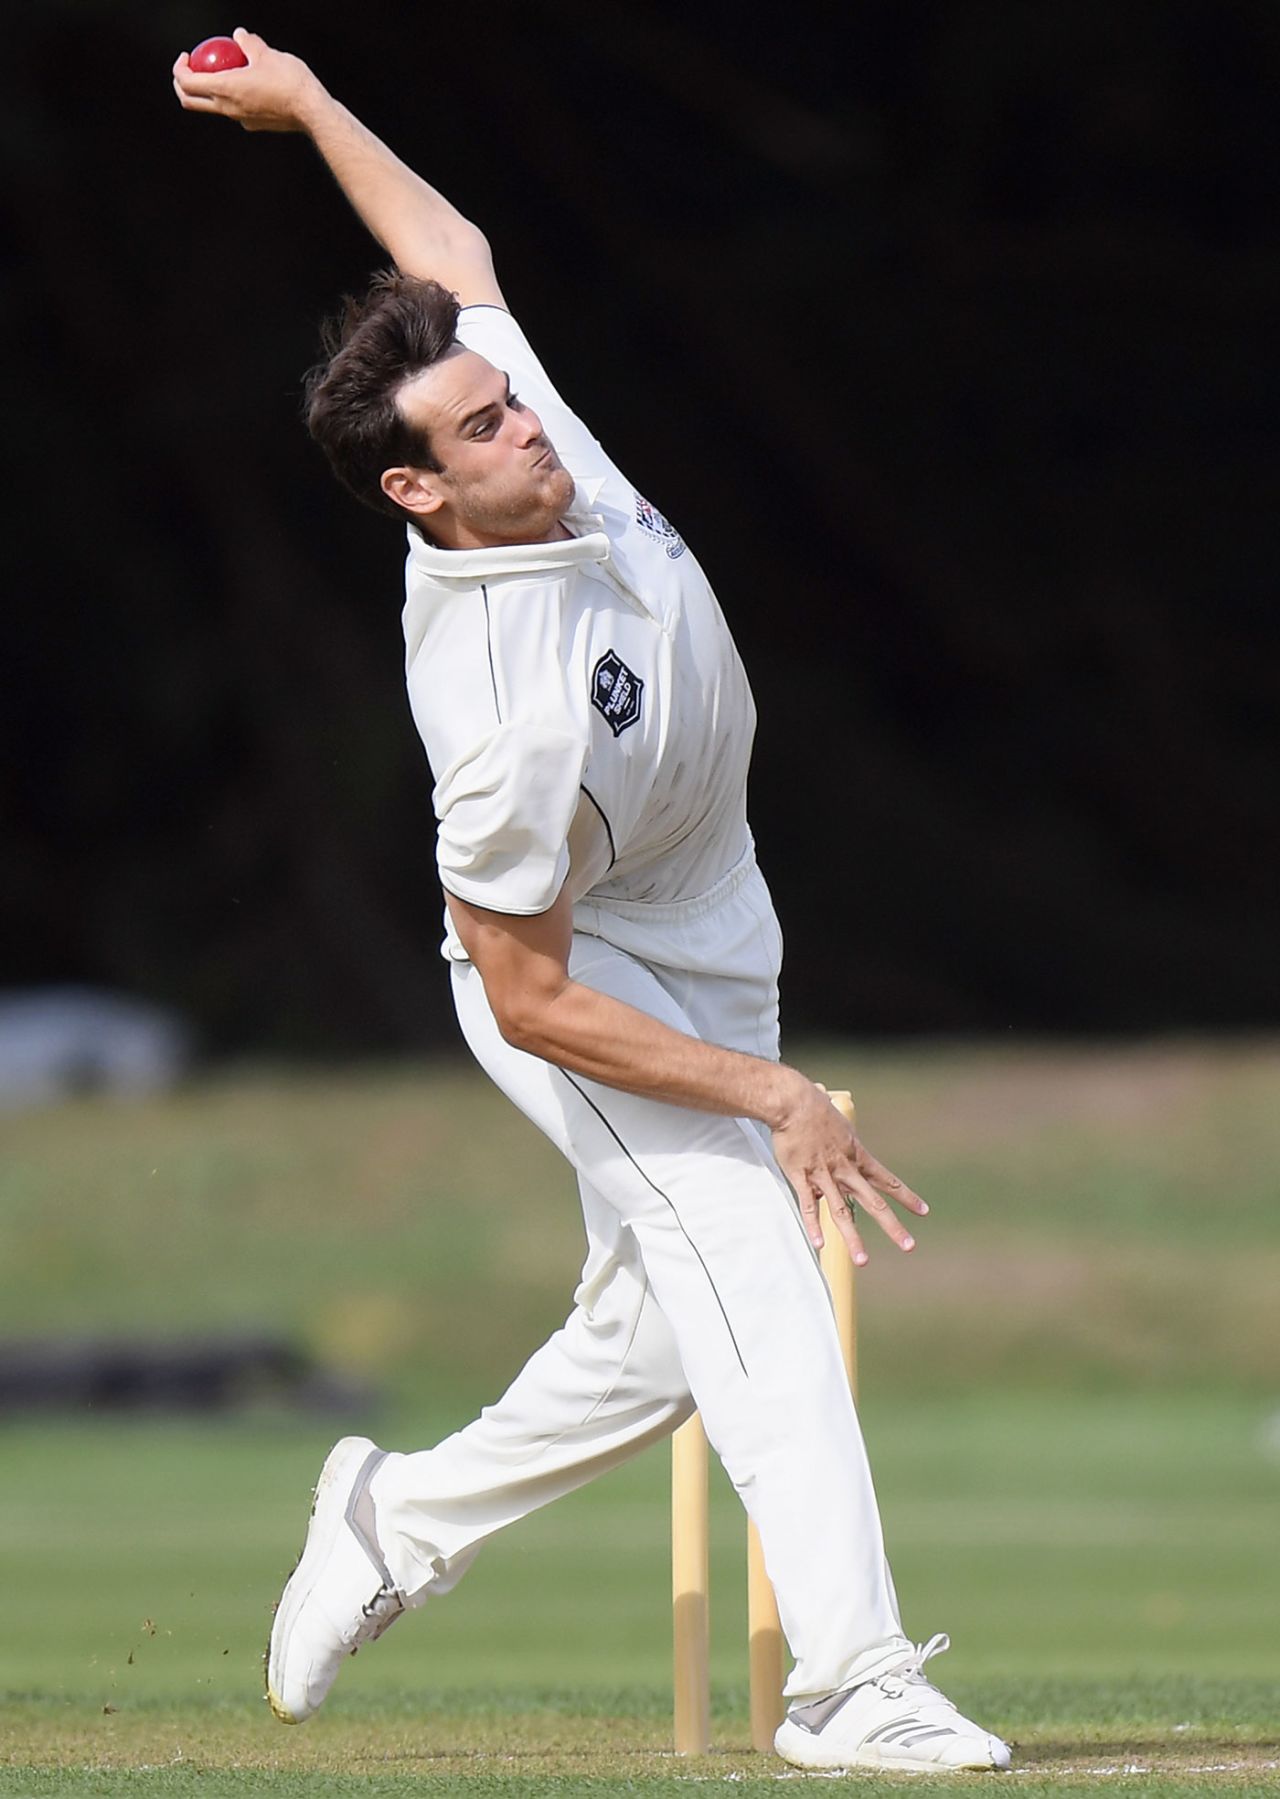 Ben Lister in his delivery stride, Canterbury v Auckland, Plunket Shield, Rangiora, March 11, 2019